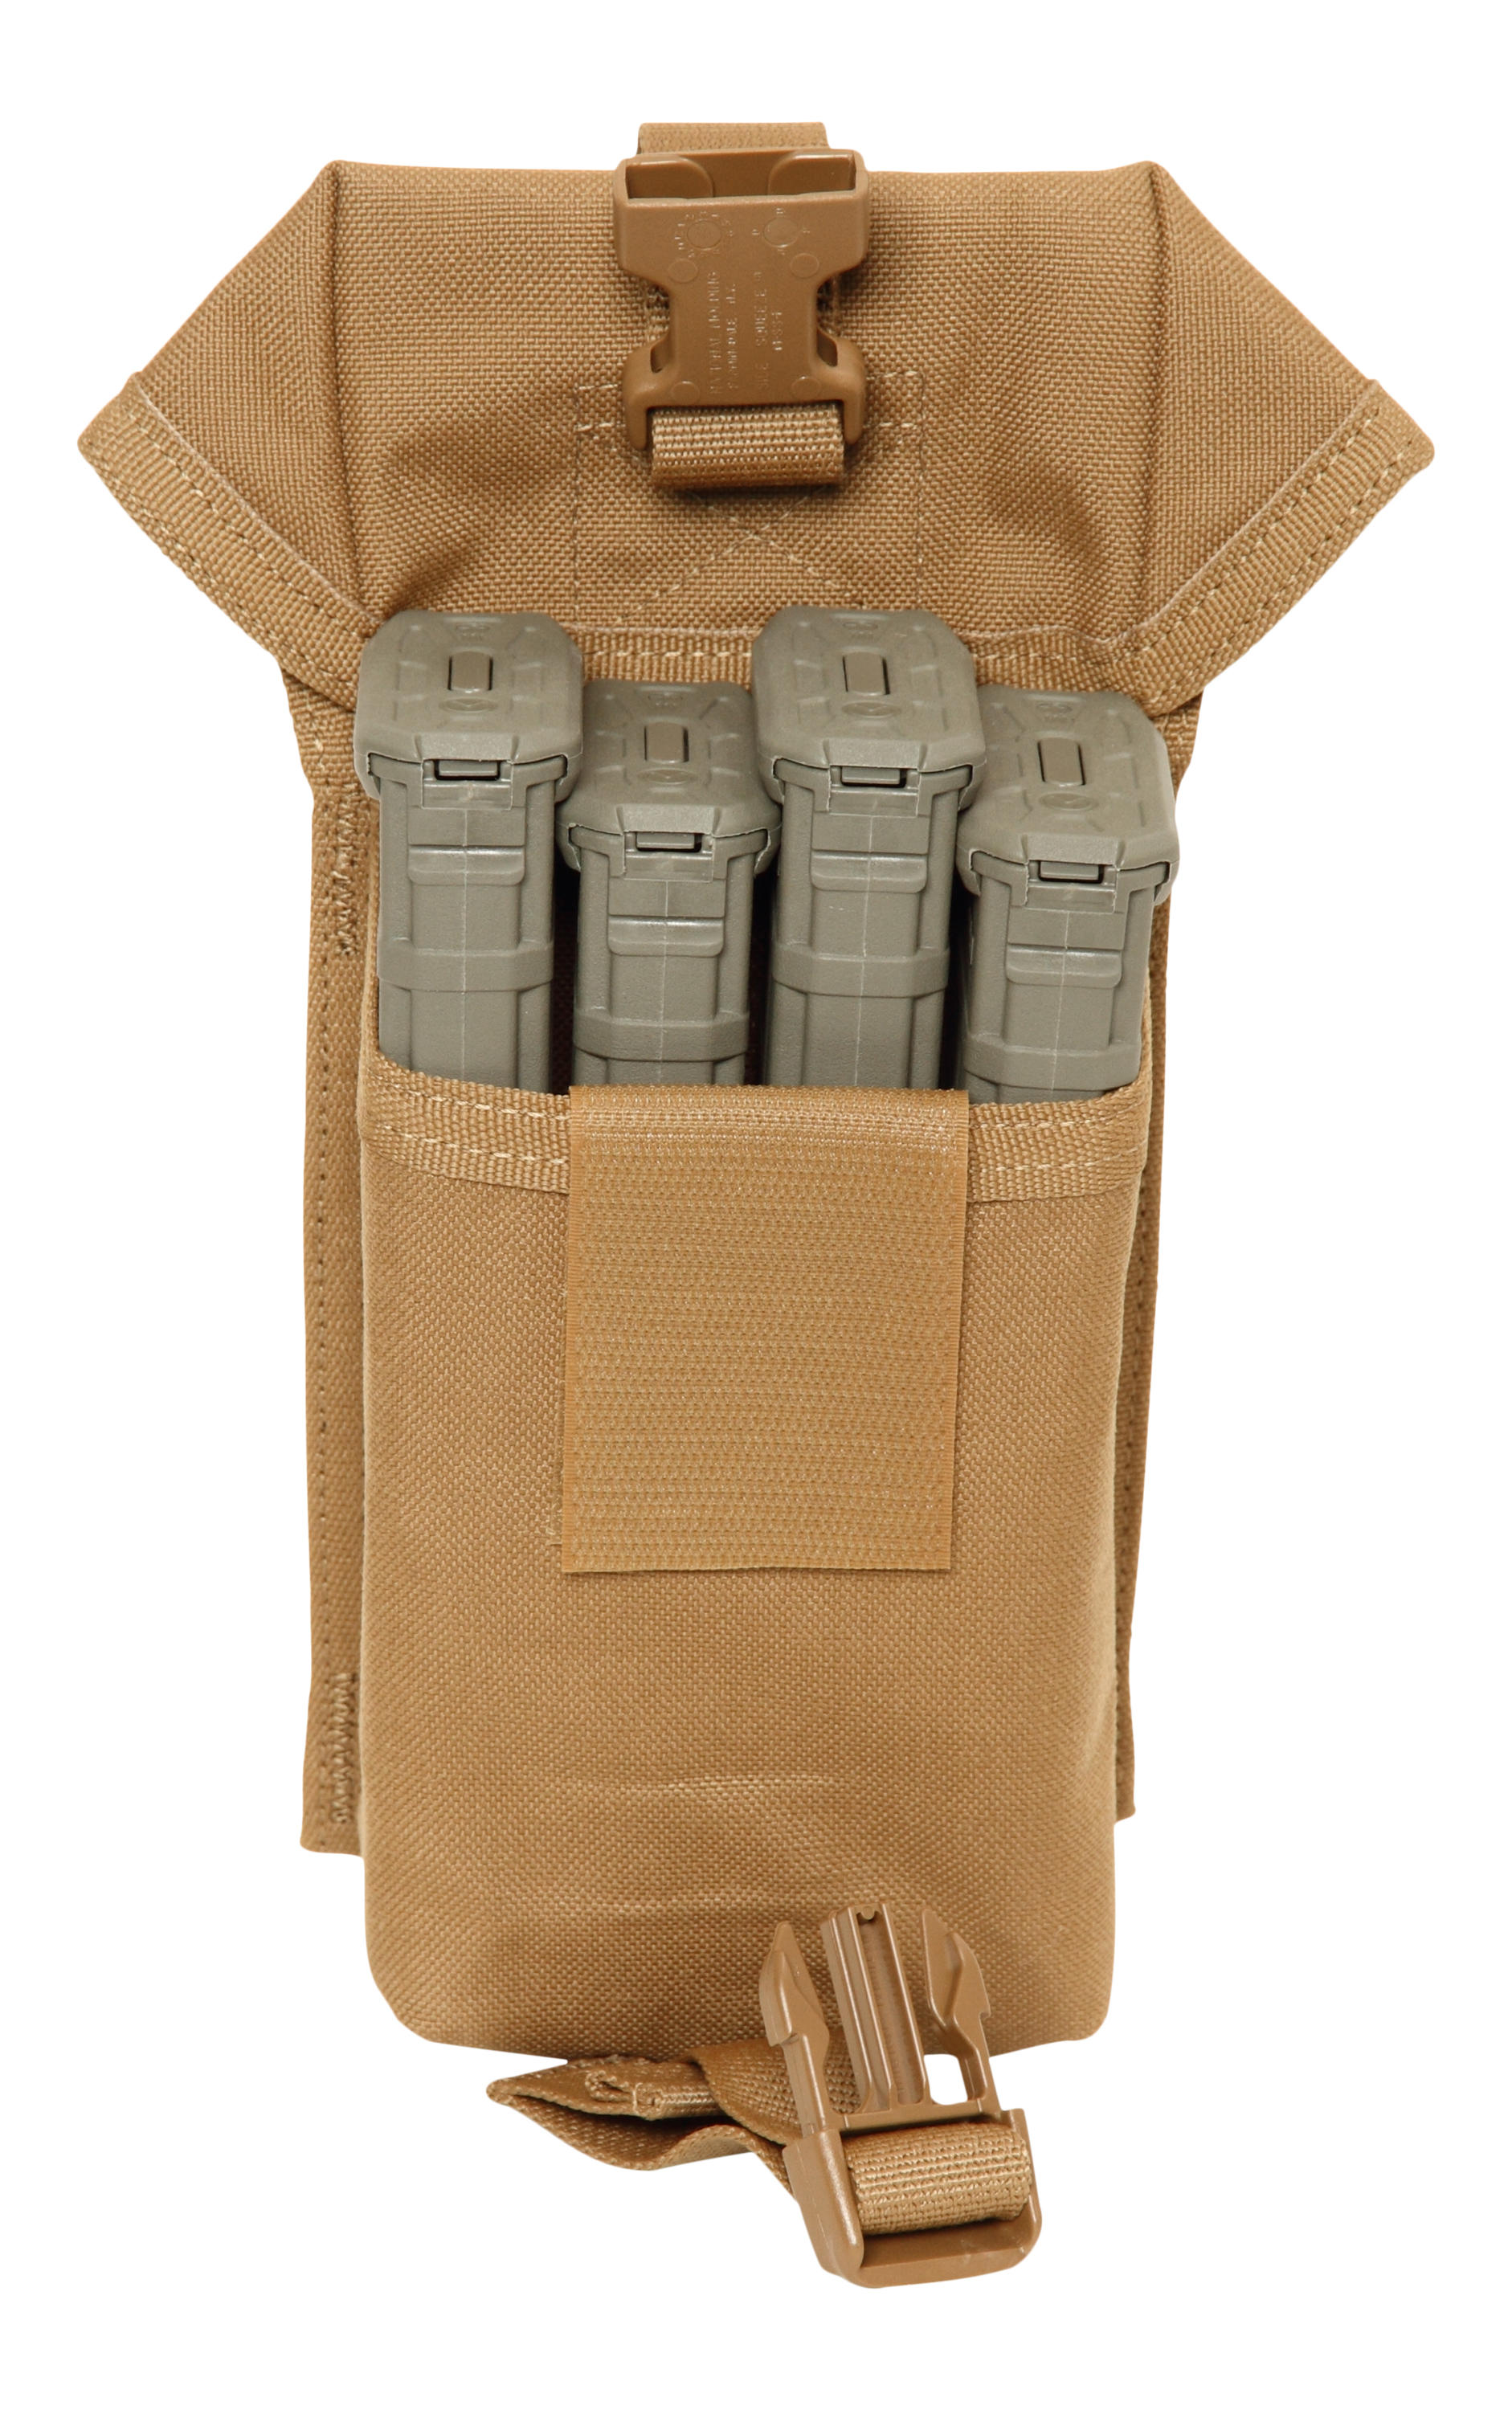 *Spec-Ops Brand 4 Magazine Utility Pouch HOLDS 4 Magazines  #100170213 